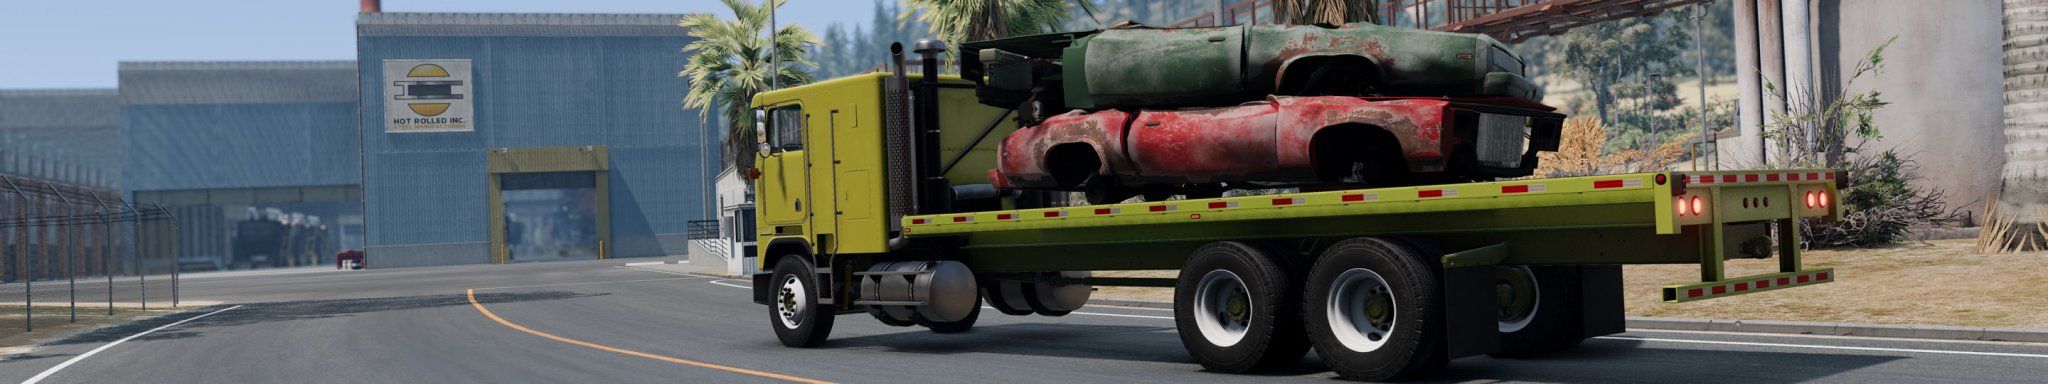 2 BeamNG CRUSHED CARS to HOT ROLLED Inc STEEL copy.jpg